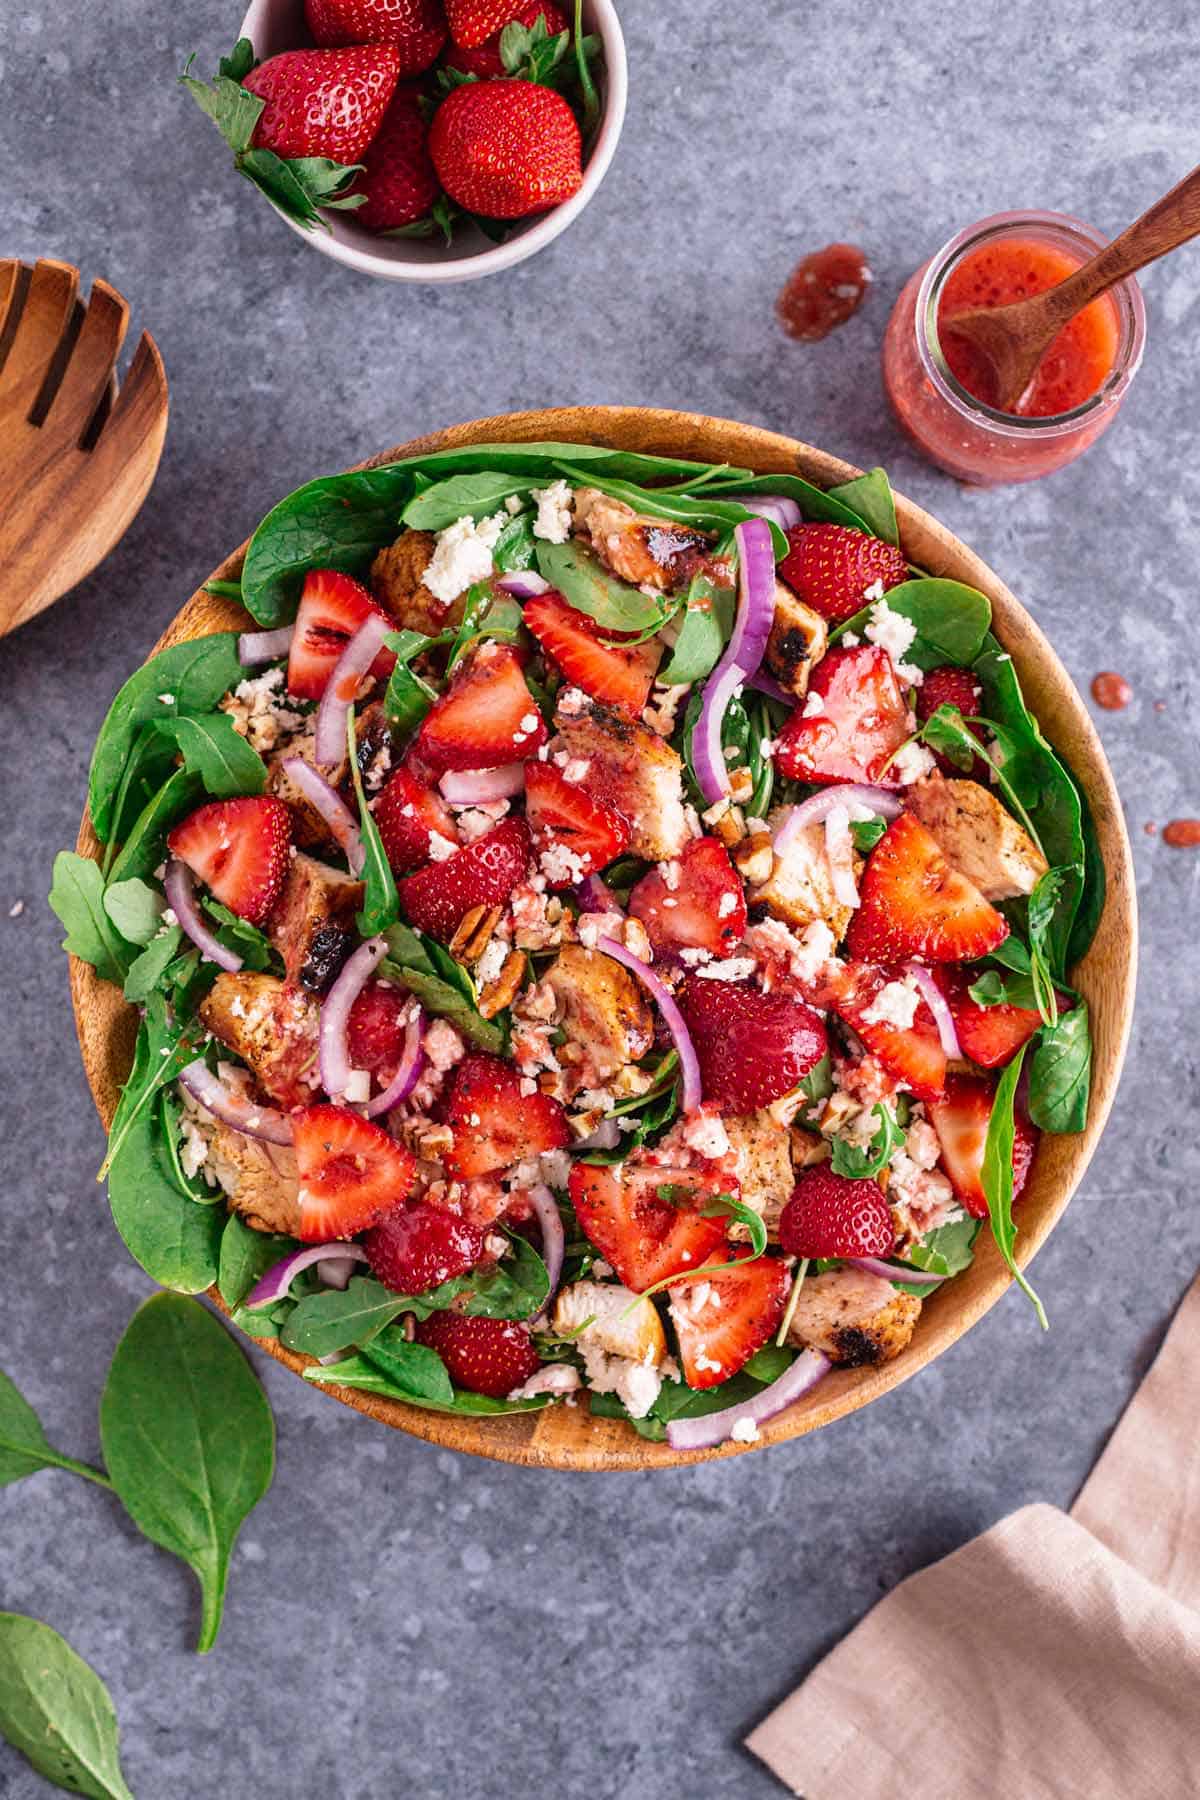 Chicken Salad With Strawberries ina wooden bowl